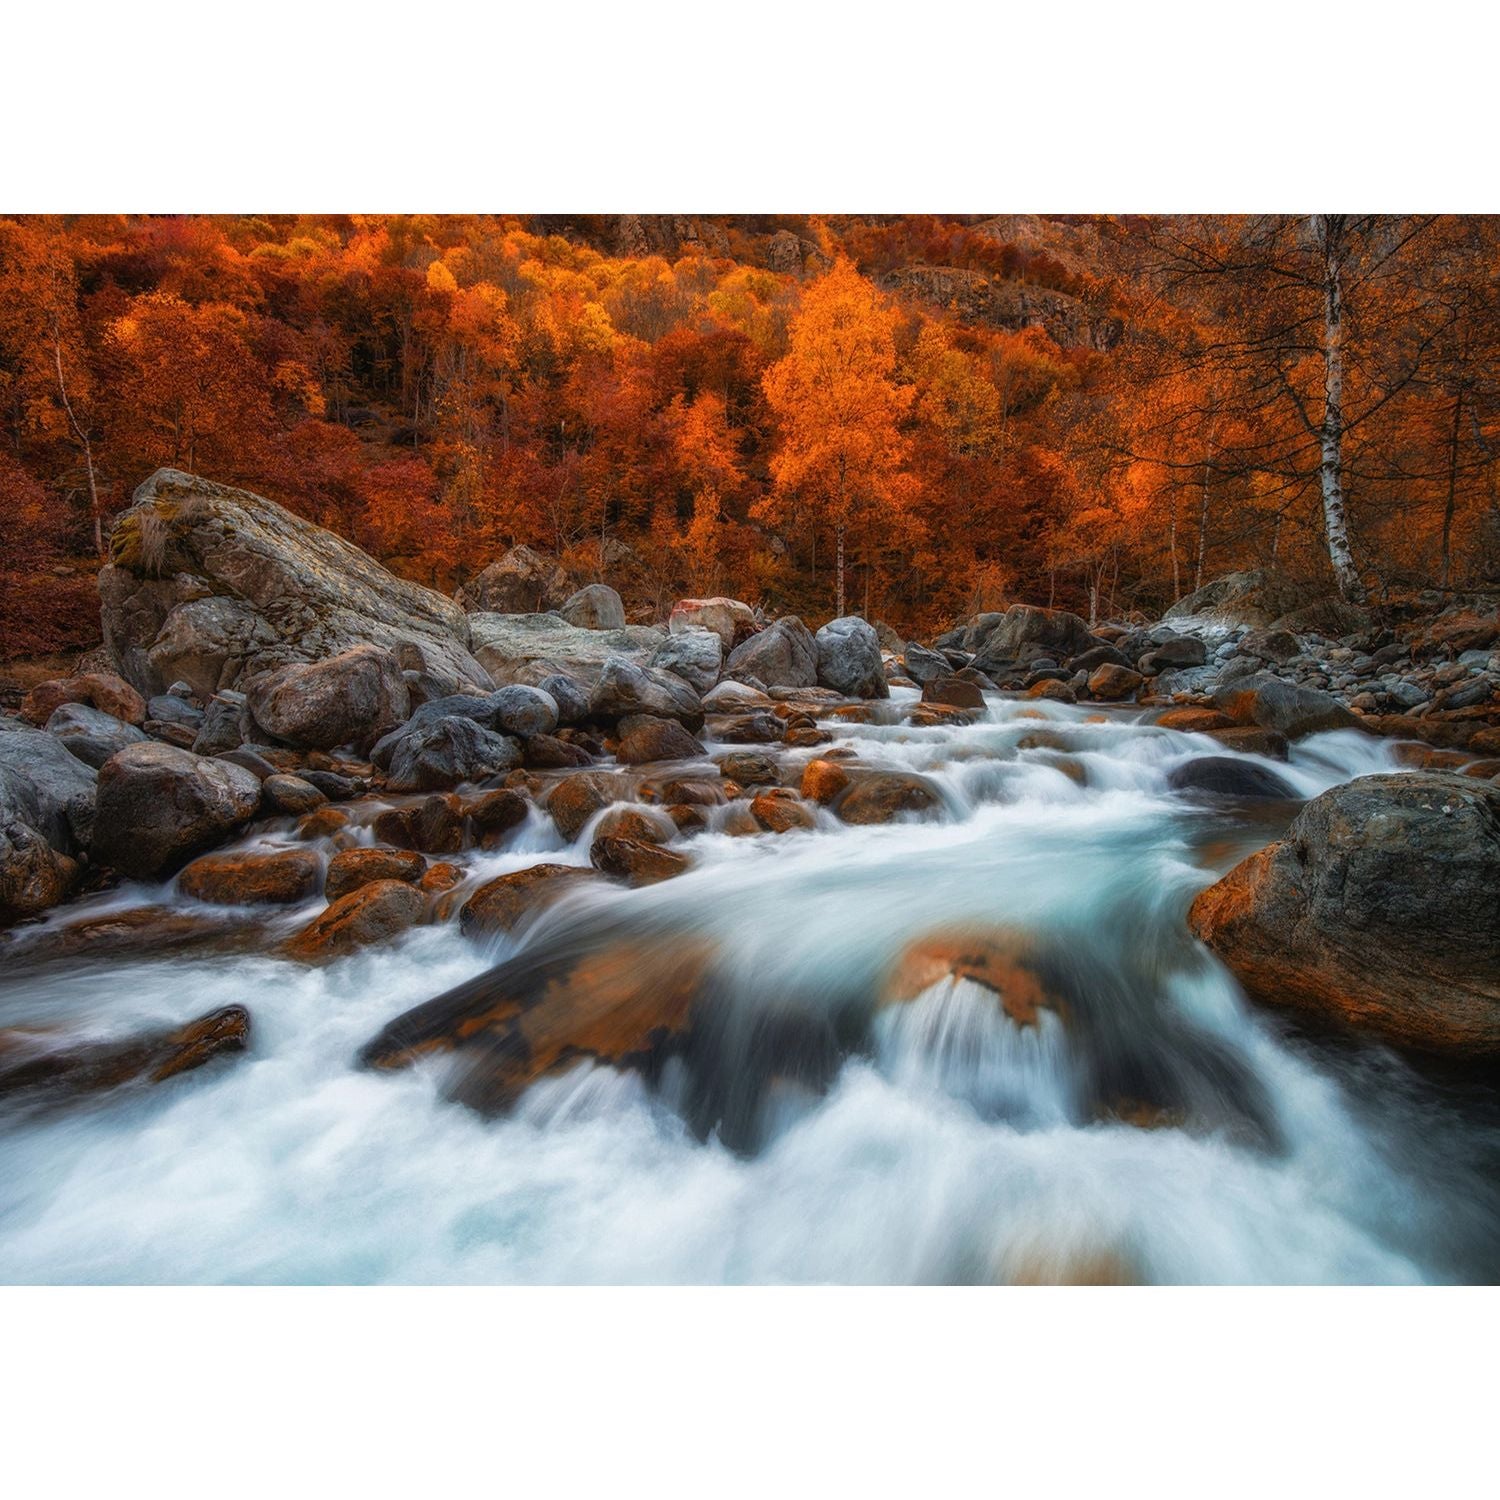 Rushing River: Forest Wall Mural